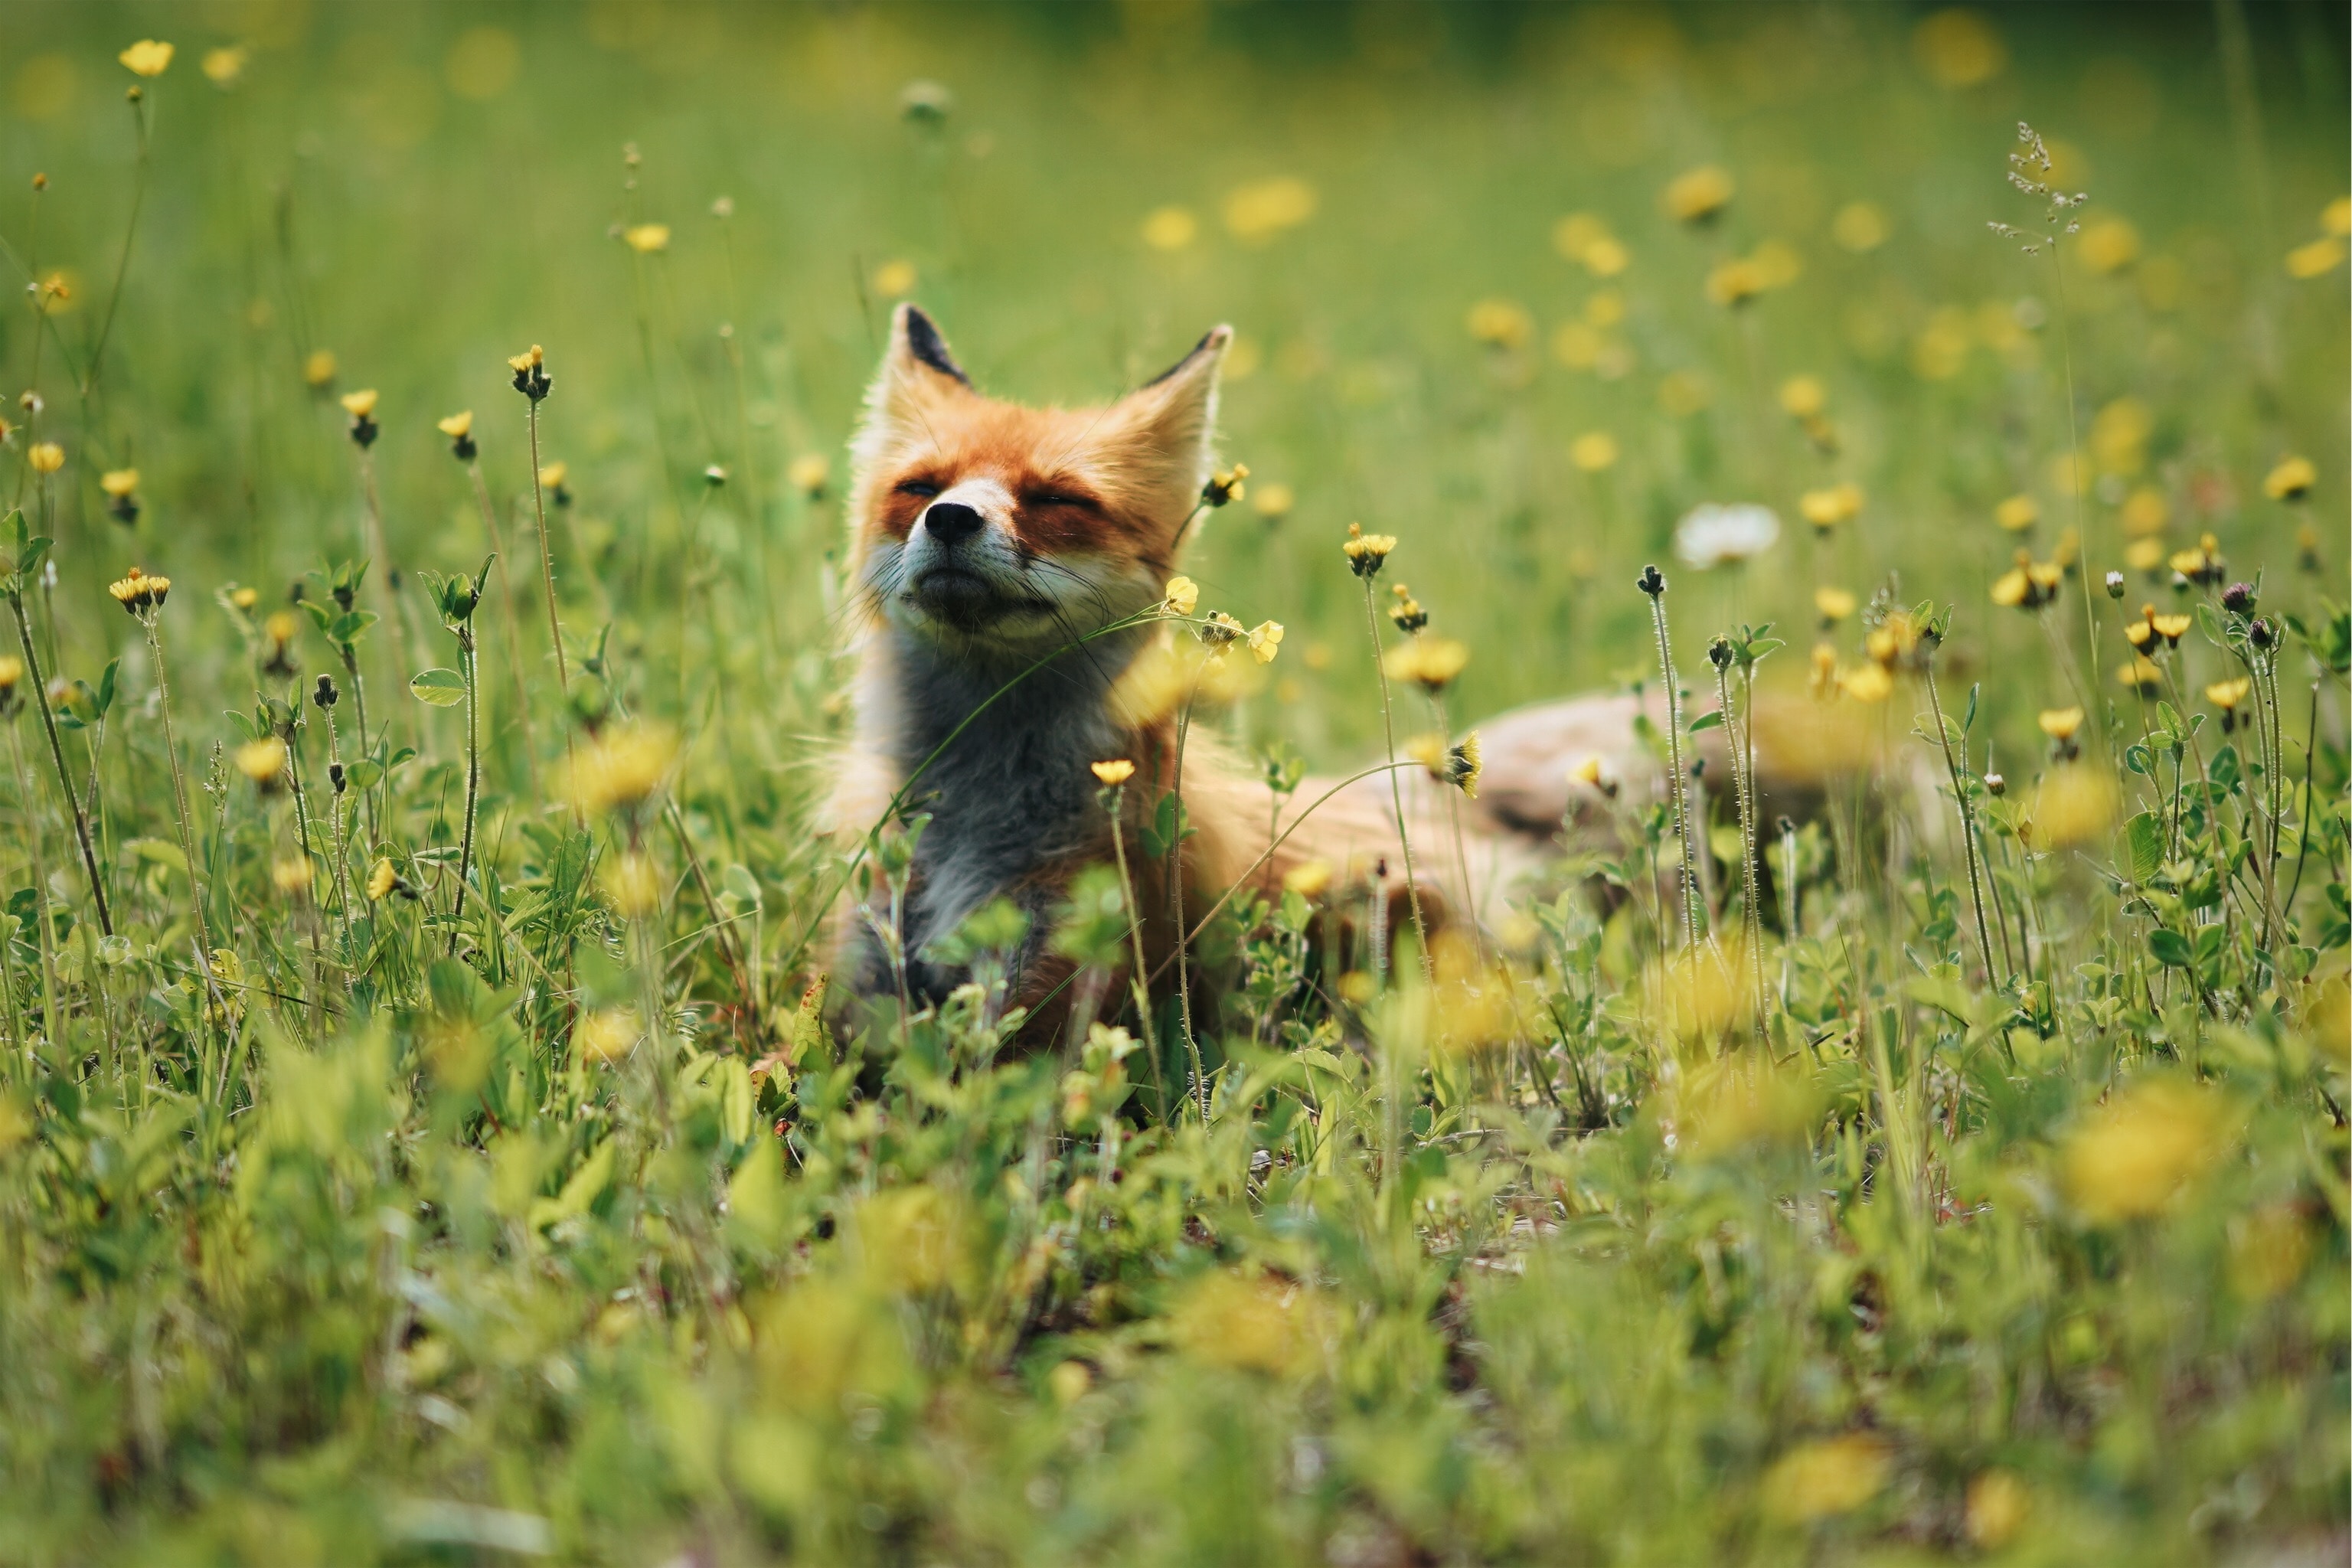 90447 download wallpaper fox, animals, flowers, grass, animal, nice, sweetheart screensavers and pictures for free